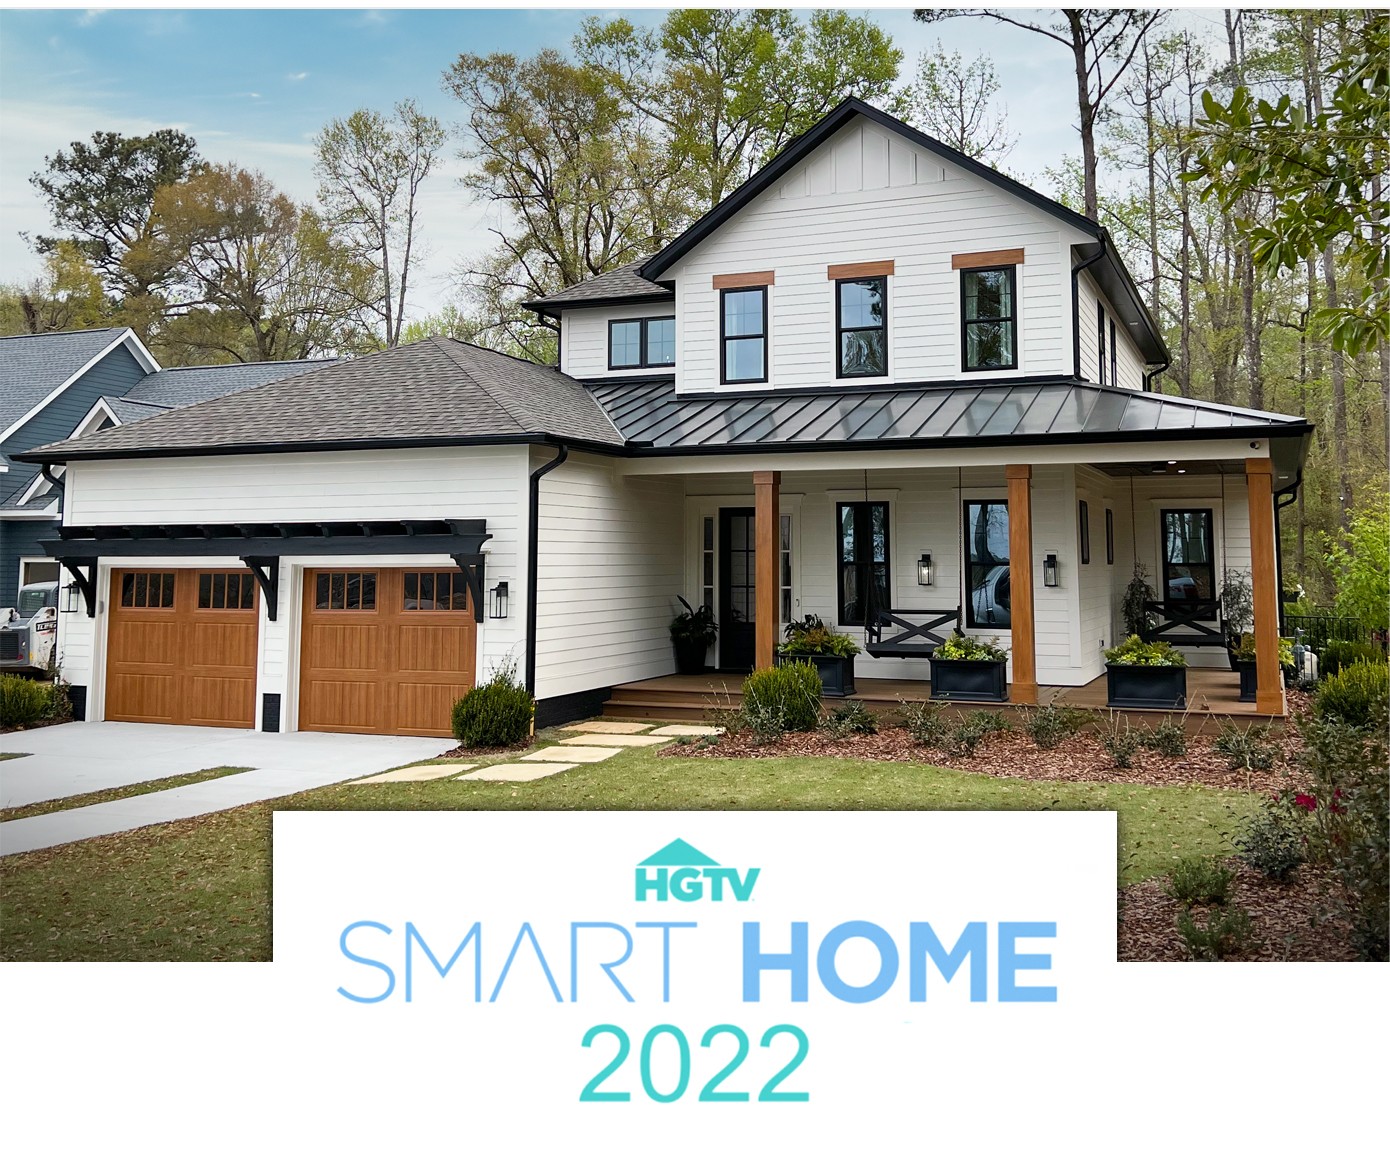 HGTV Smart Home 2022 Giveaway SDC House Plans